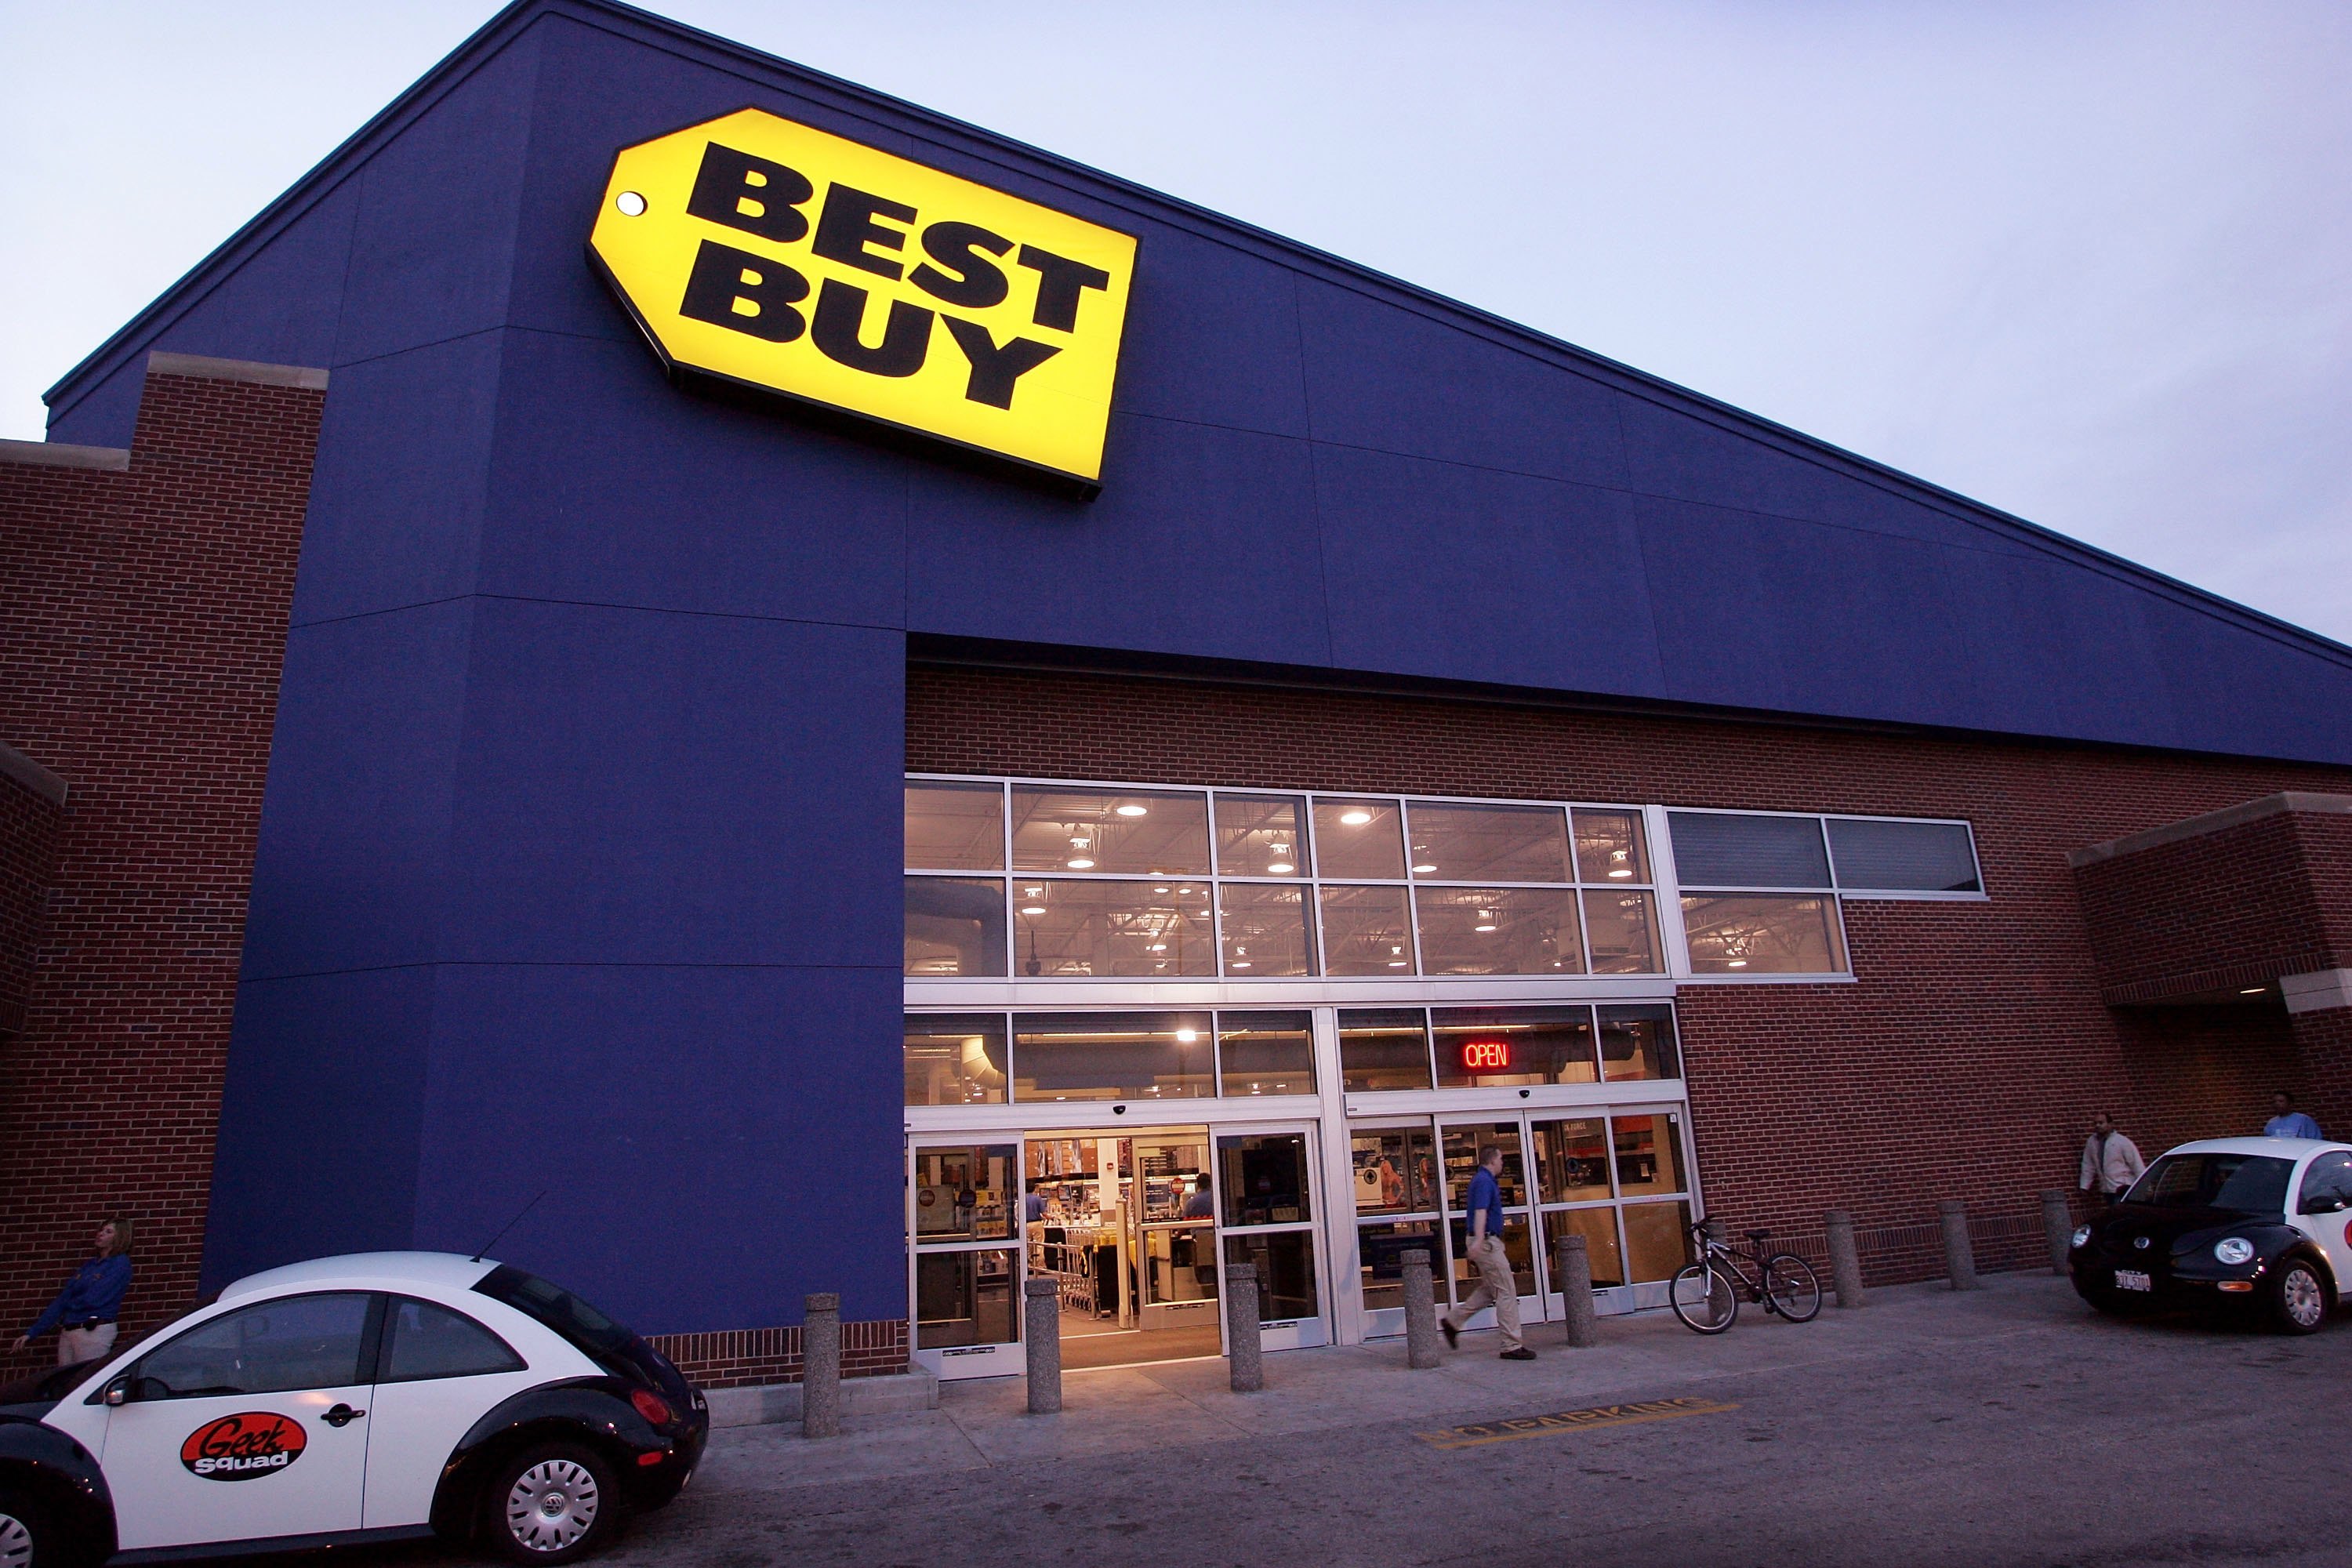 15 HQ Images Best Buy Appointment : Best Buy tests 'appointment shopping' instead of online ...